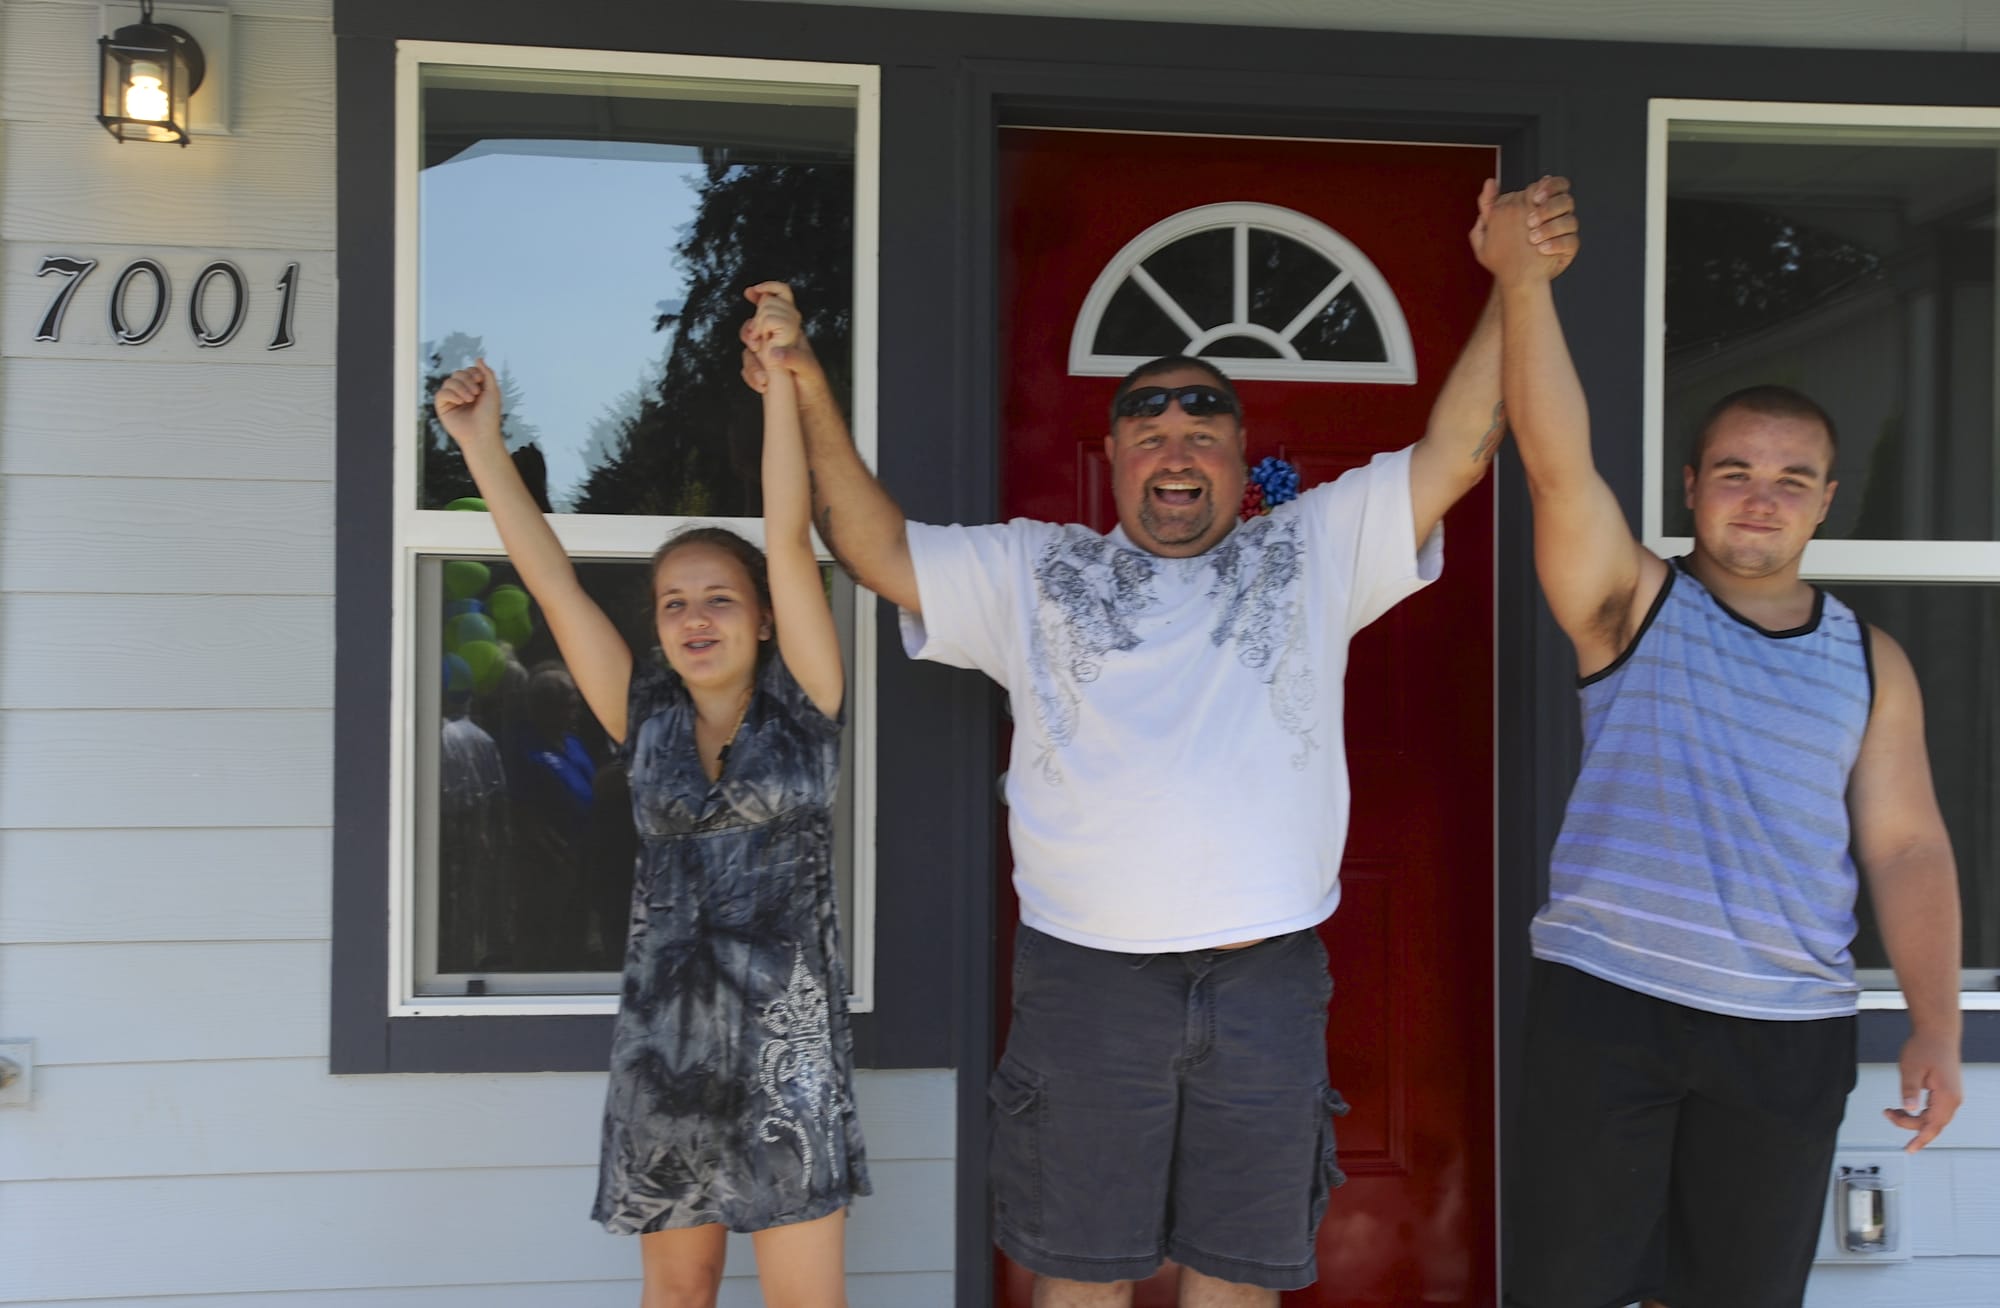 The West family -- daughter Cheyenne, dad Doug, and son Kody -- celebrate on the front porch of their new home Sunday.